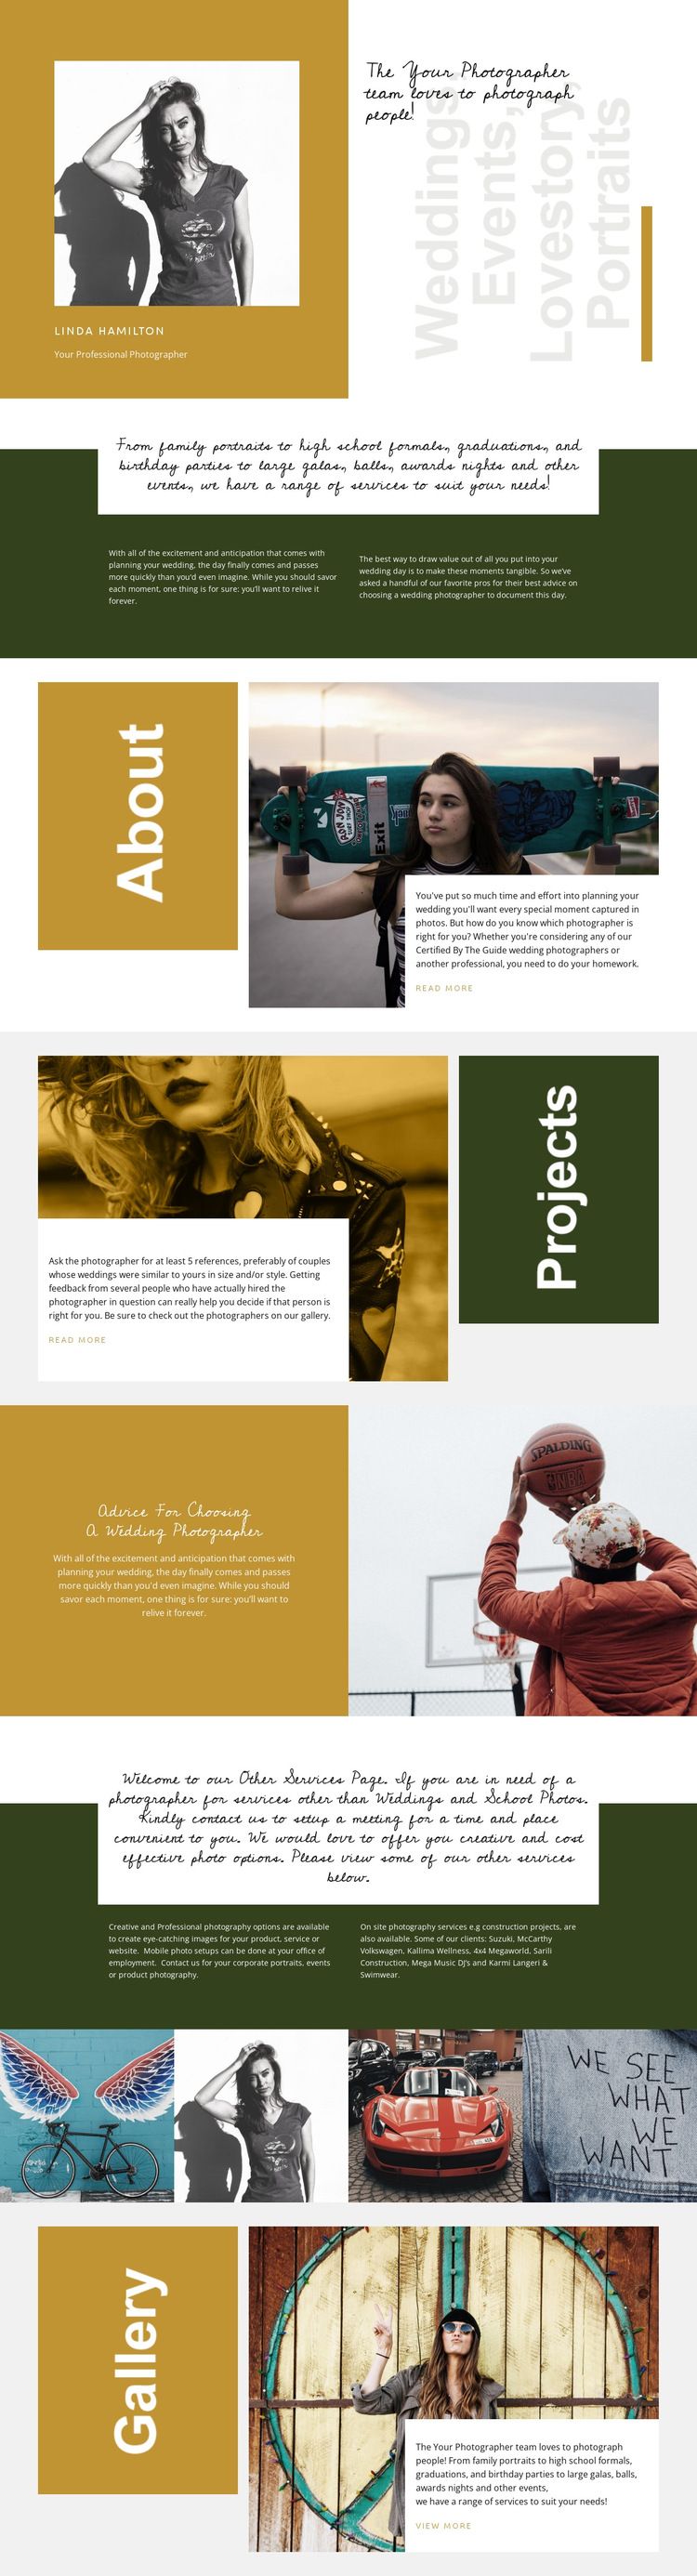 Fashion photography courses HTML5 Template